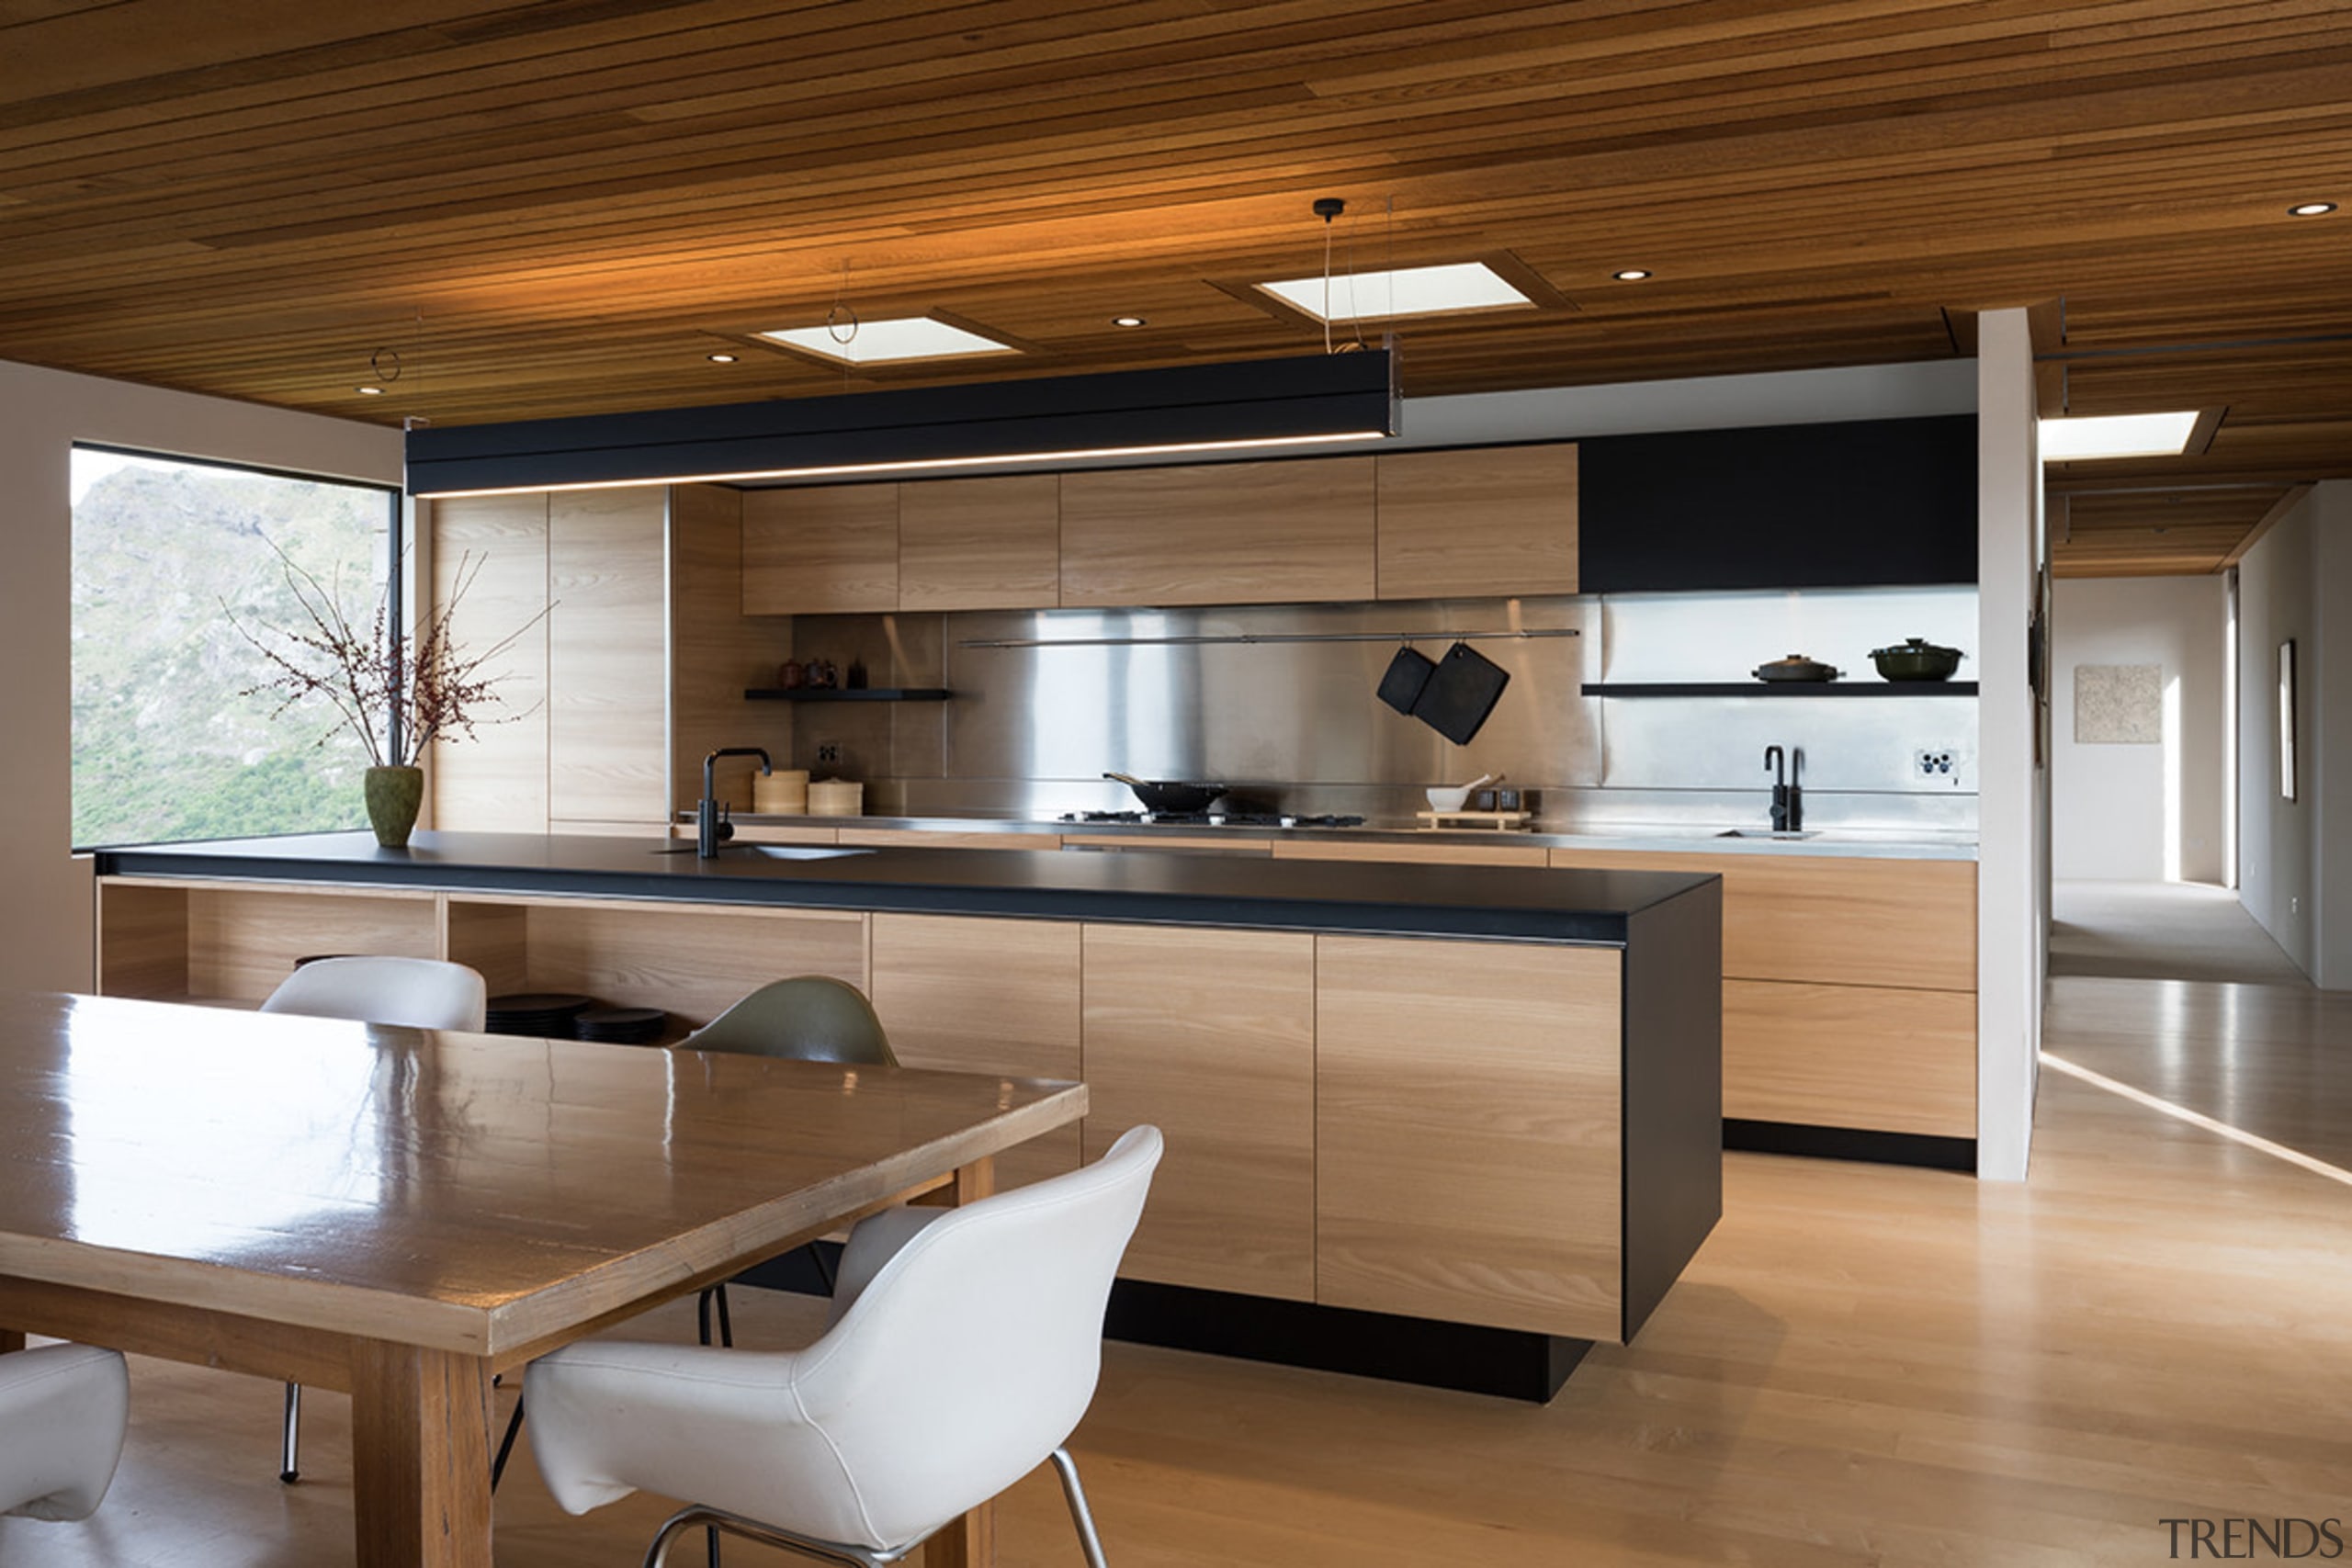 The warmth of wood meets the cool of countertop, cuisine classique, interior design, kitchen, brown